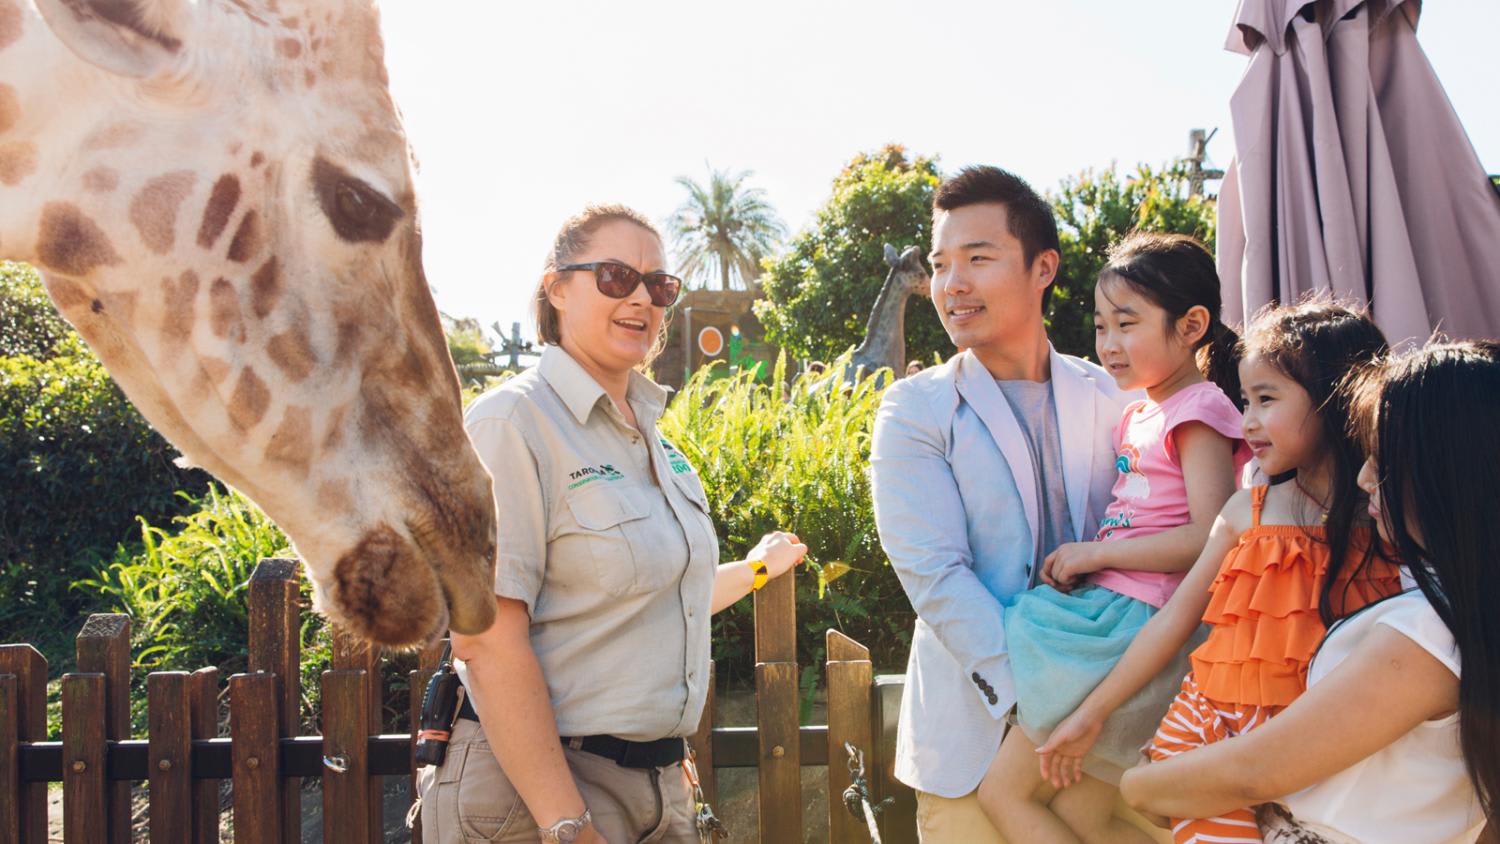 Top 5 ways to get the most out of your Sydney and New South Wales family getaway